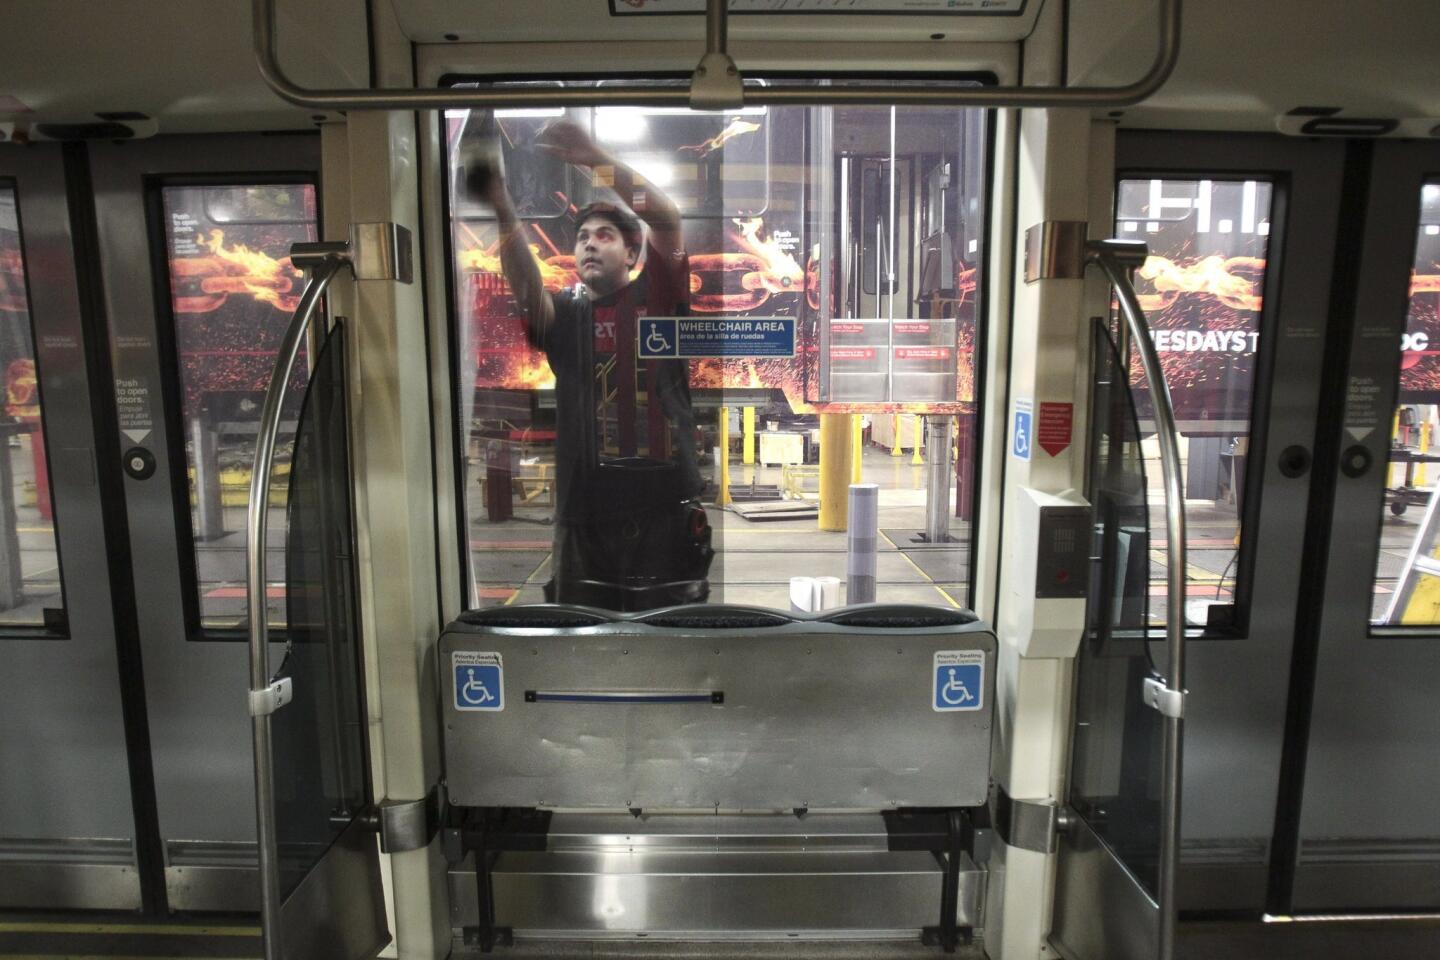 Viewed from inside a trolley car, David Garcia puts perforated material that is transparent for the windows as he and a crew put on an advertising wrap for TBS television host Conan O'Brien's talk show.